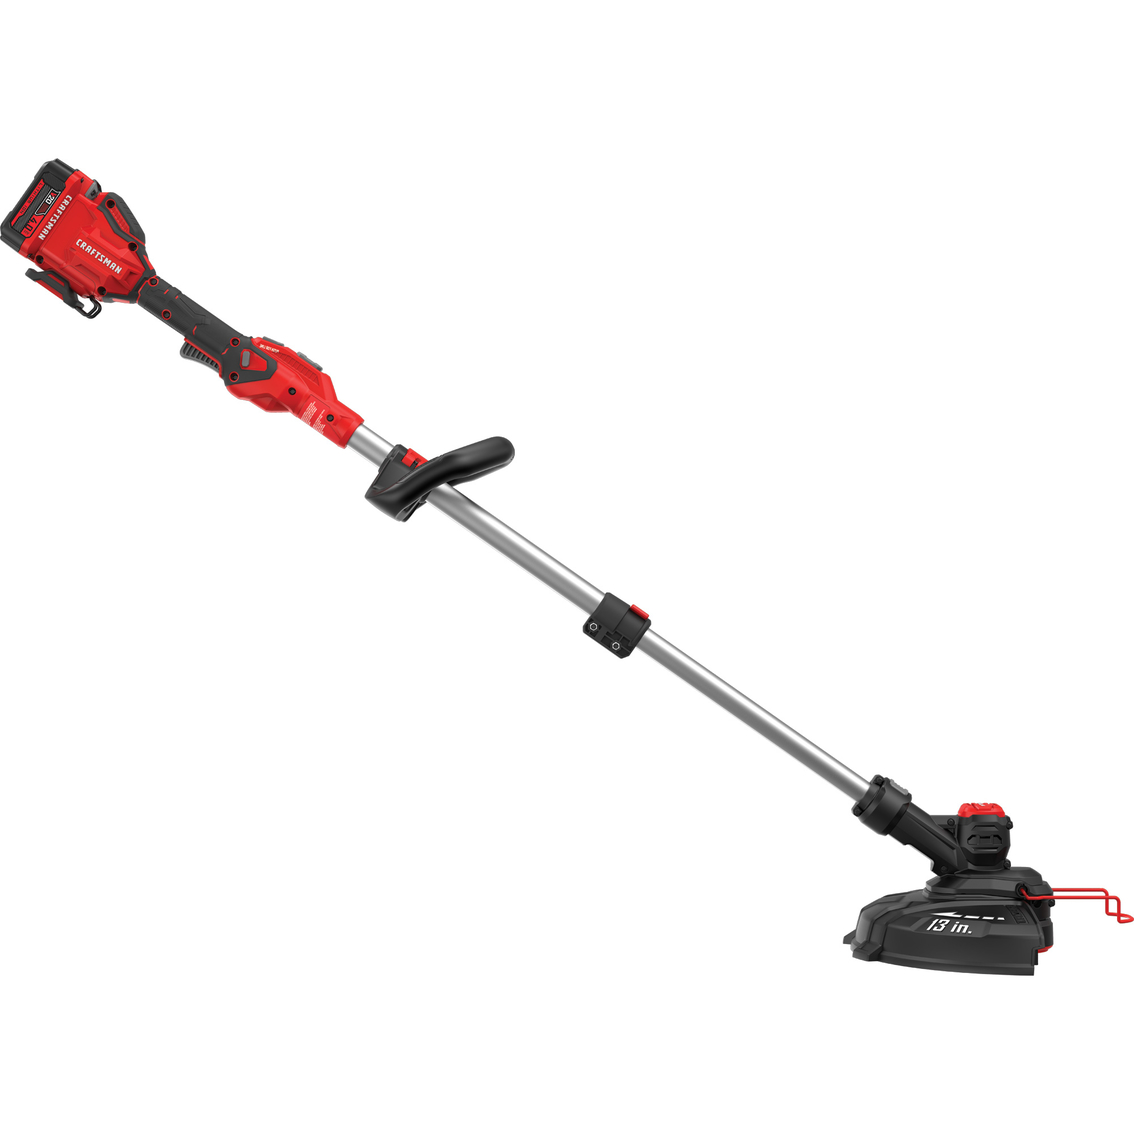 Craftsman V20 Cordless String Trimmer with Battery - Image 2 of 6